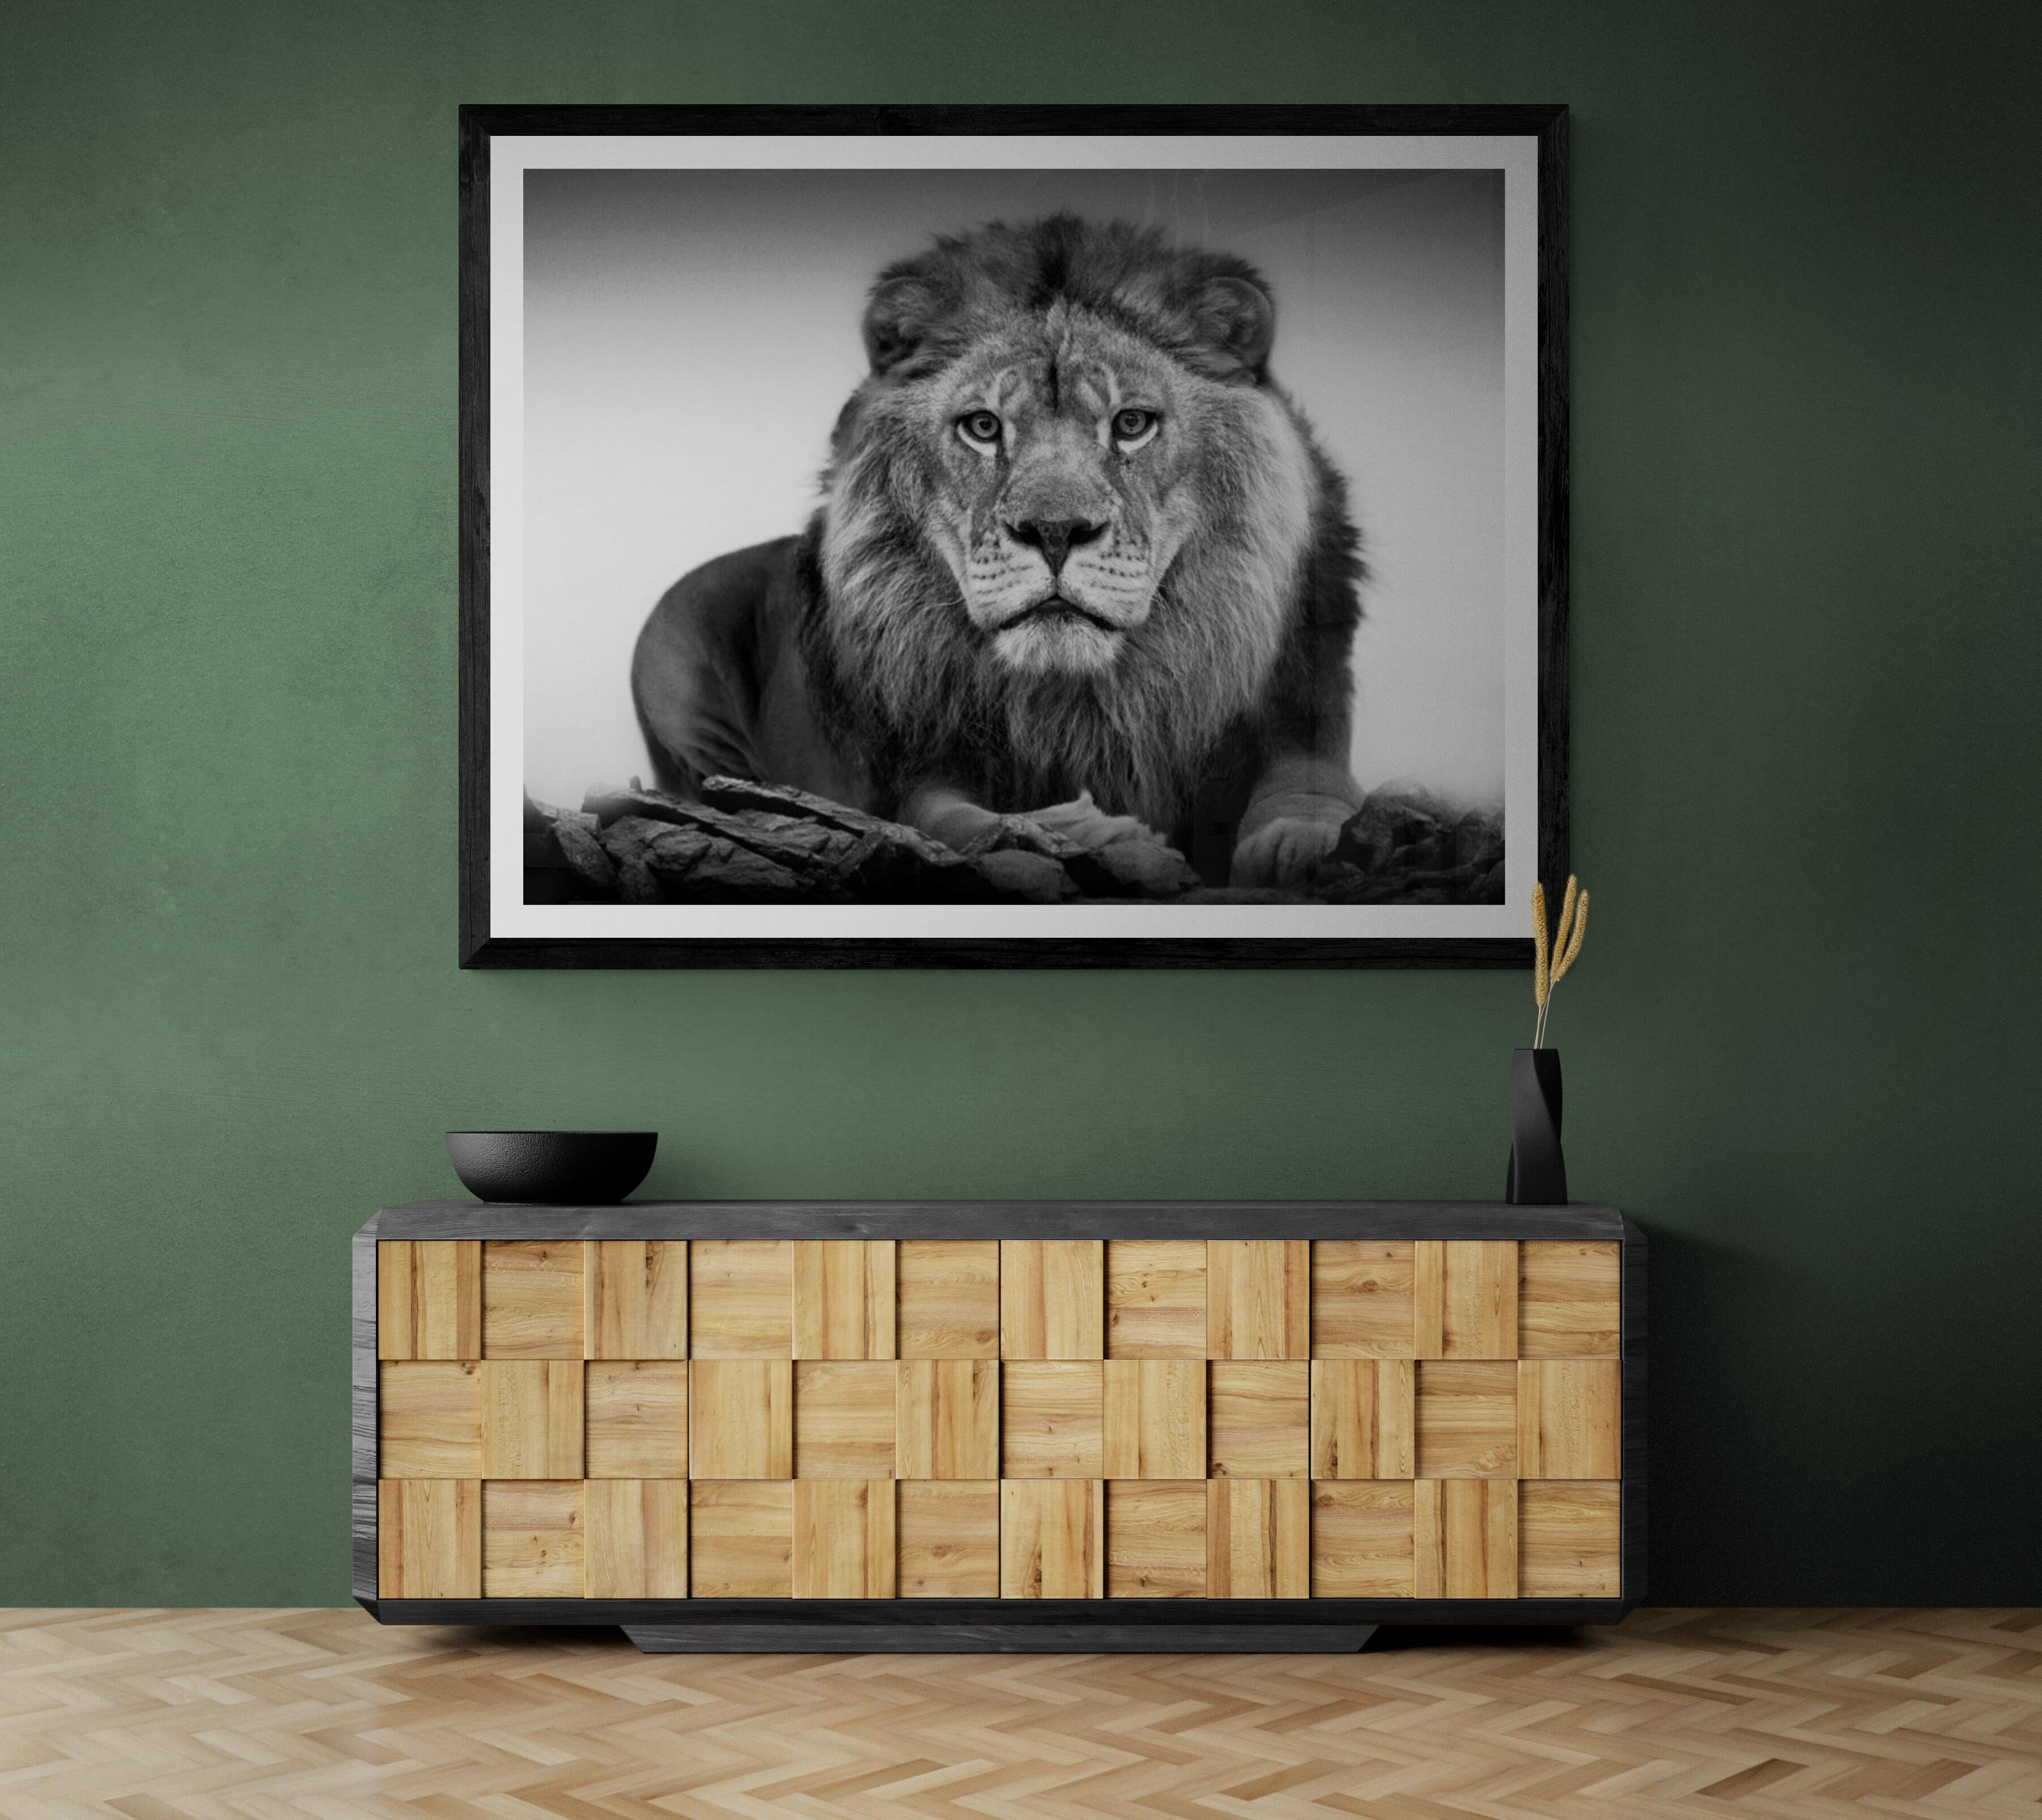 This is a contemporary photograph of an African Lion. 
40x60
Unsigned  Print
Archival Pigment print.
Framing available. Inquire for rates. 

FREE SHIPPING

Shane Russeck has built a reputation for capturing America's landscapes, cultures and